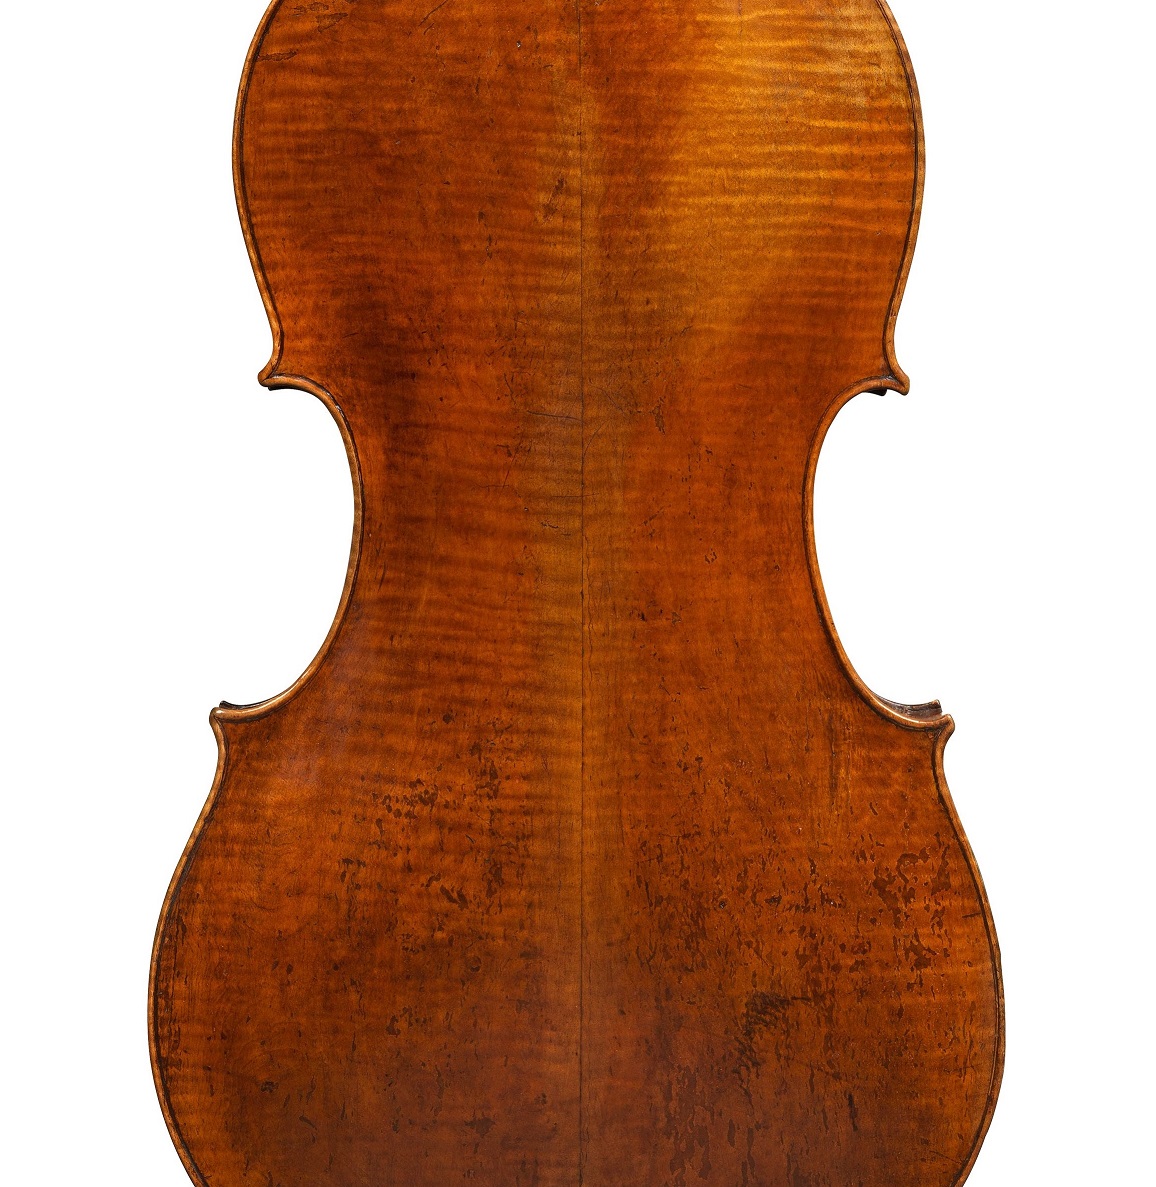 Back of the Giuseppe Guarneri filius Andreae cello that is being sold at Ingles & Hayday